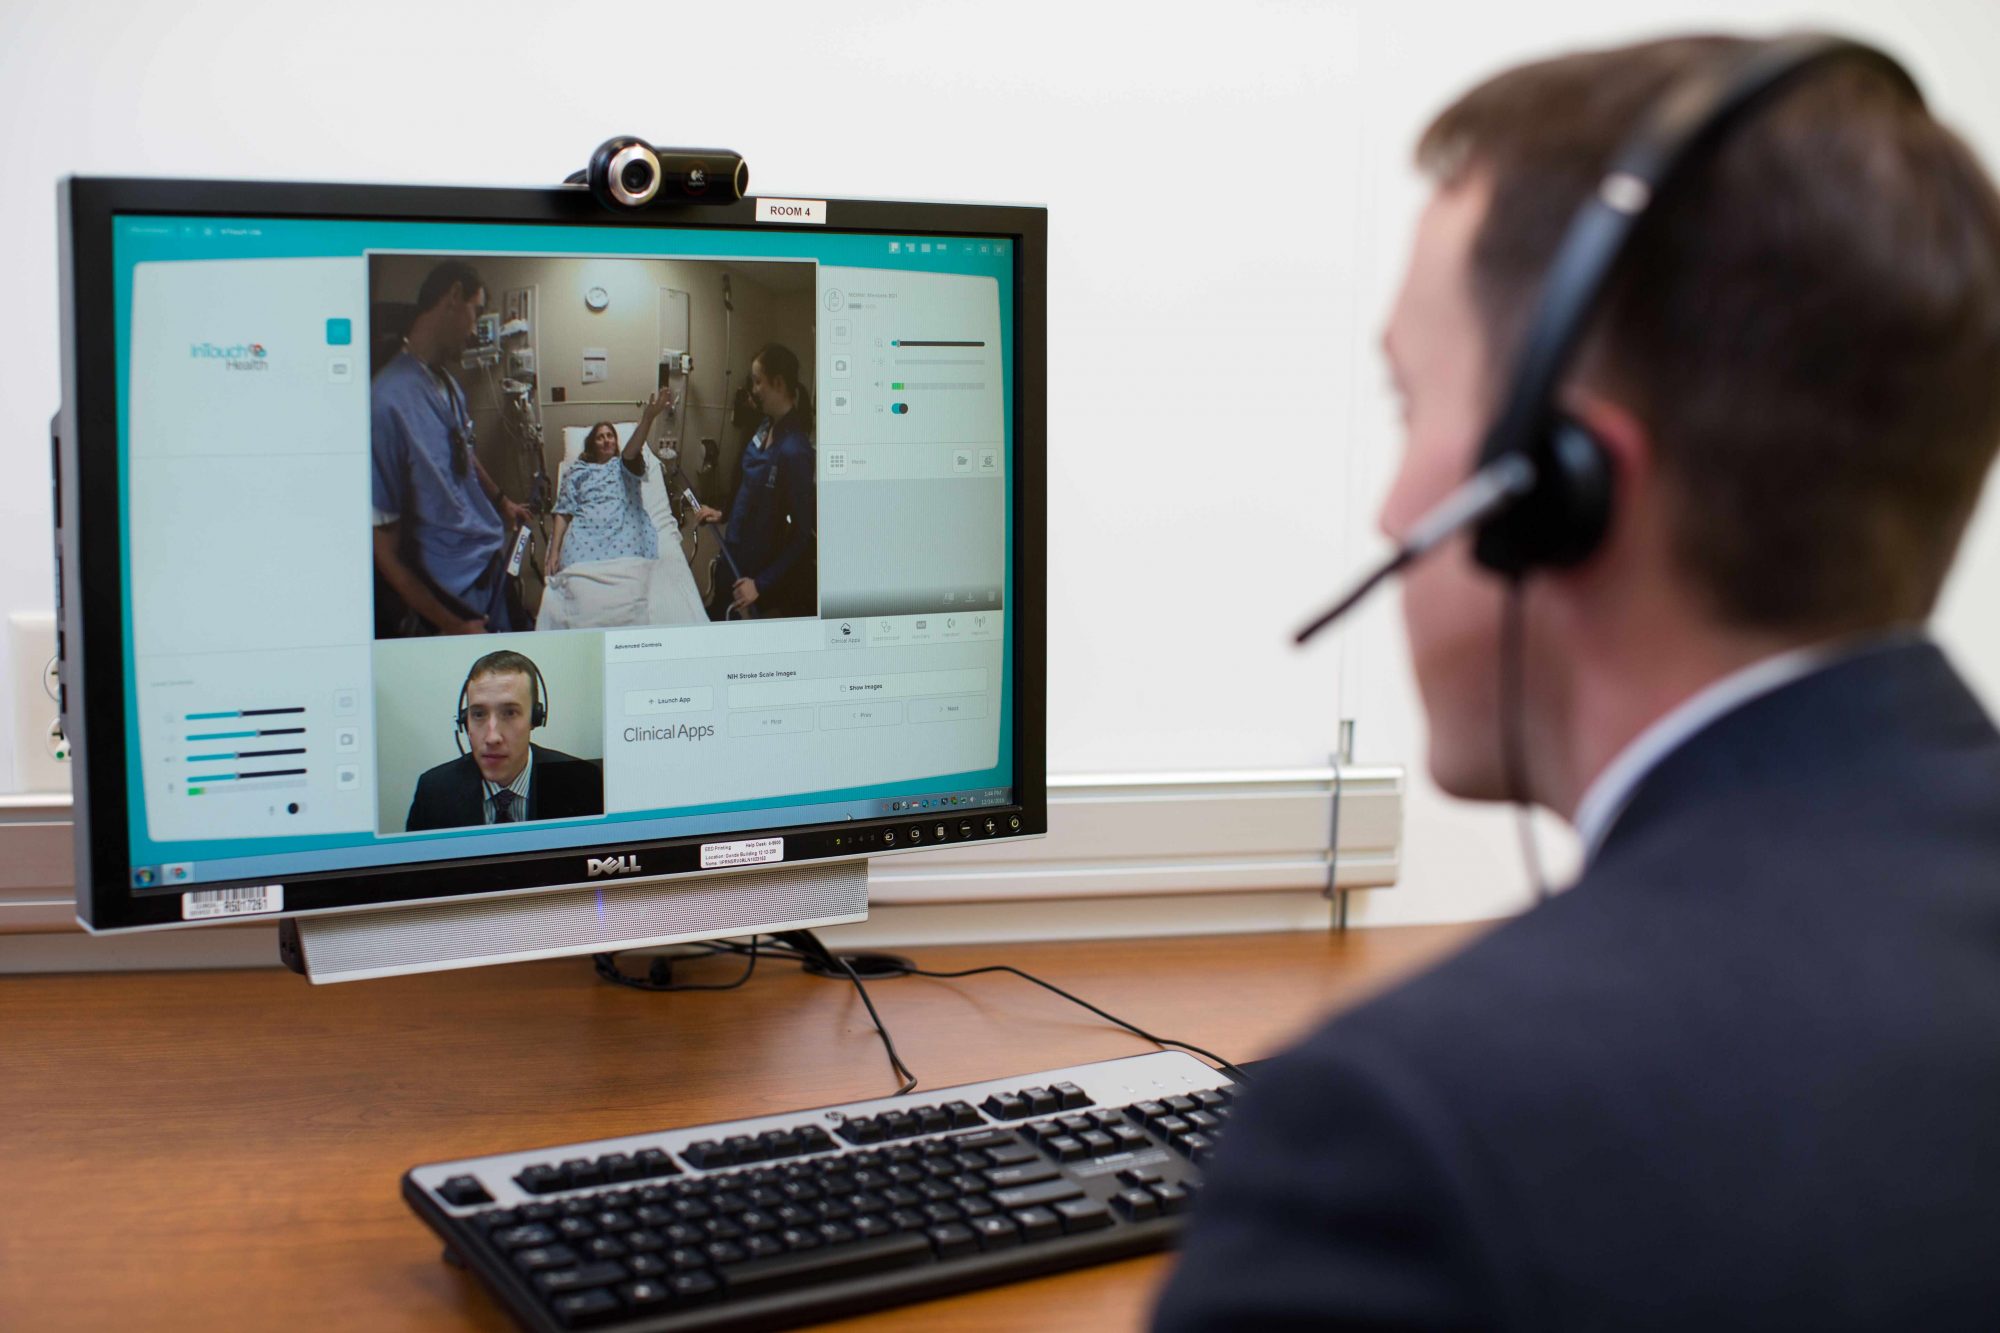 Mayo Clinic telemedicine options mean better access for rural patients and health care providers